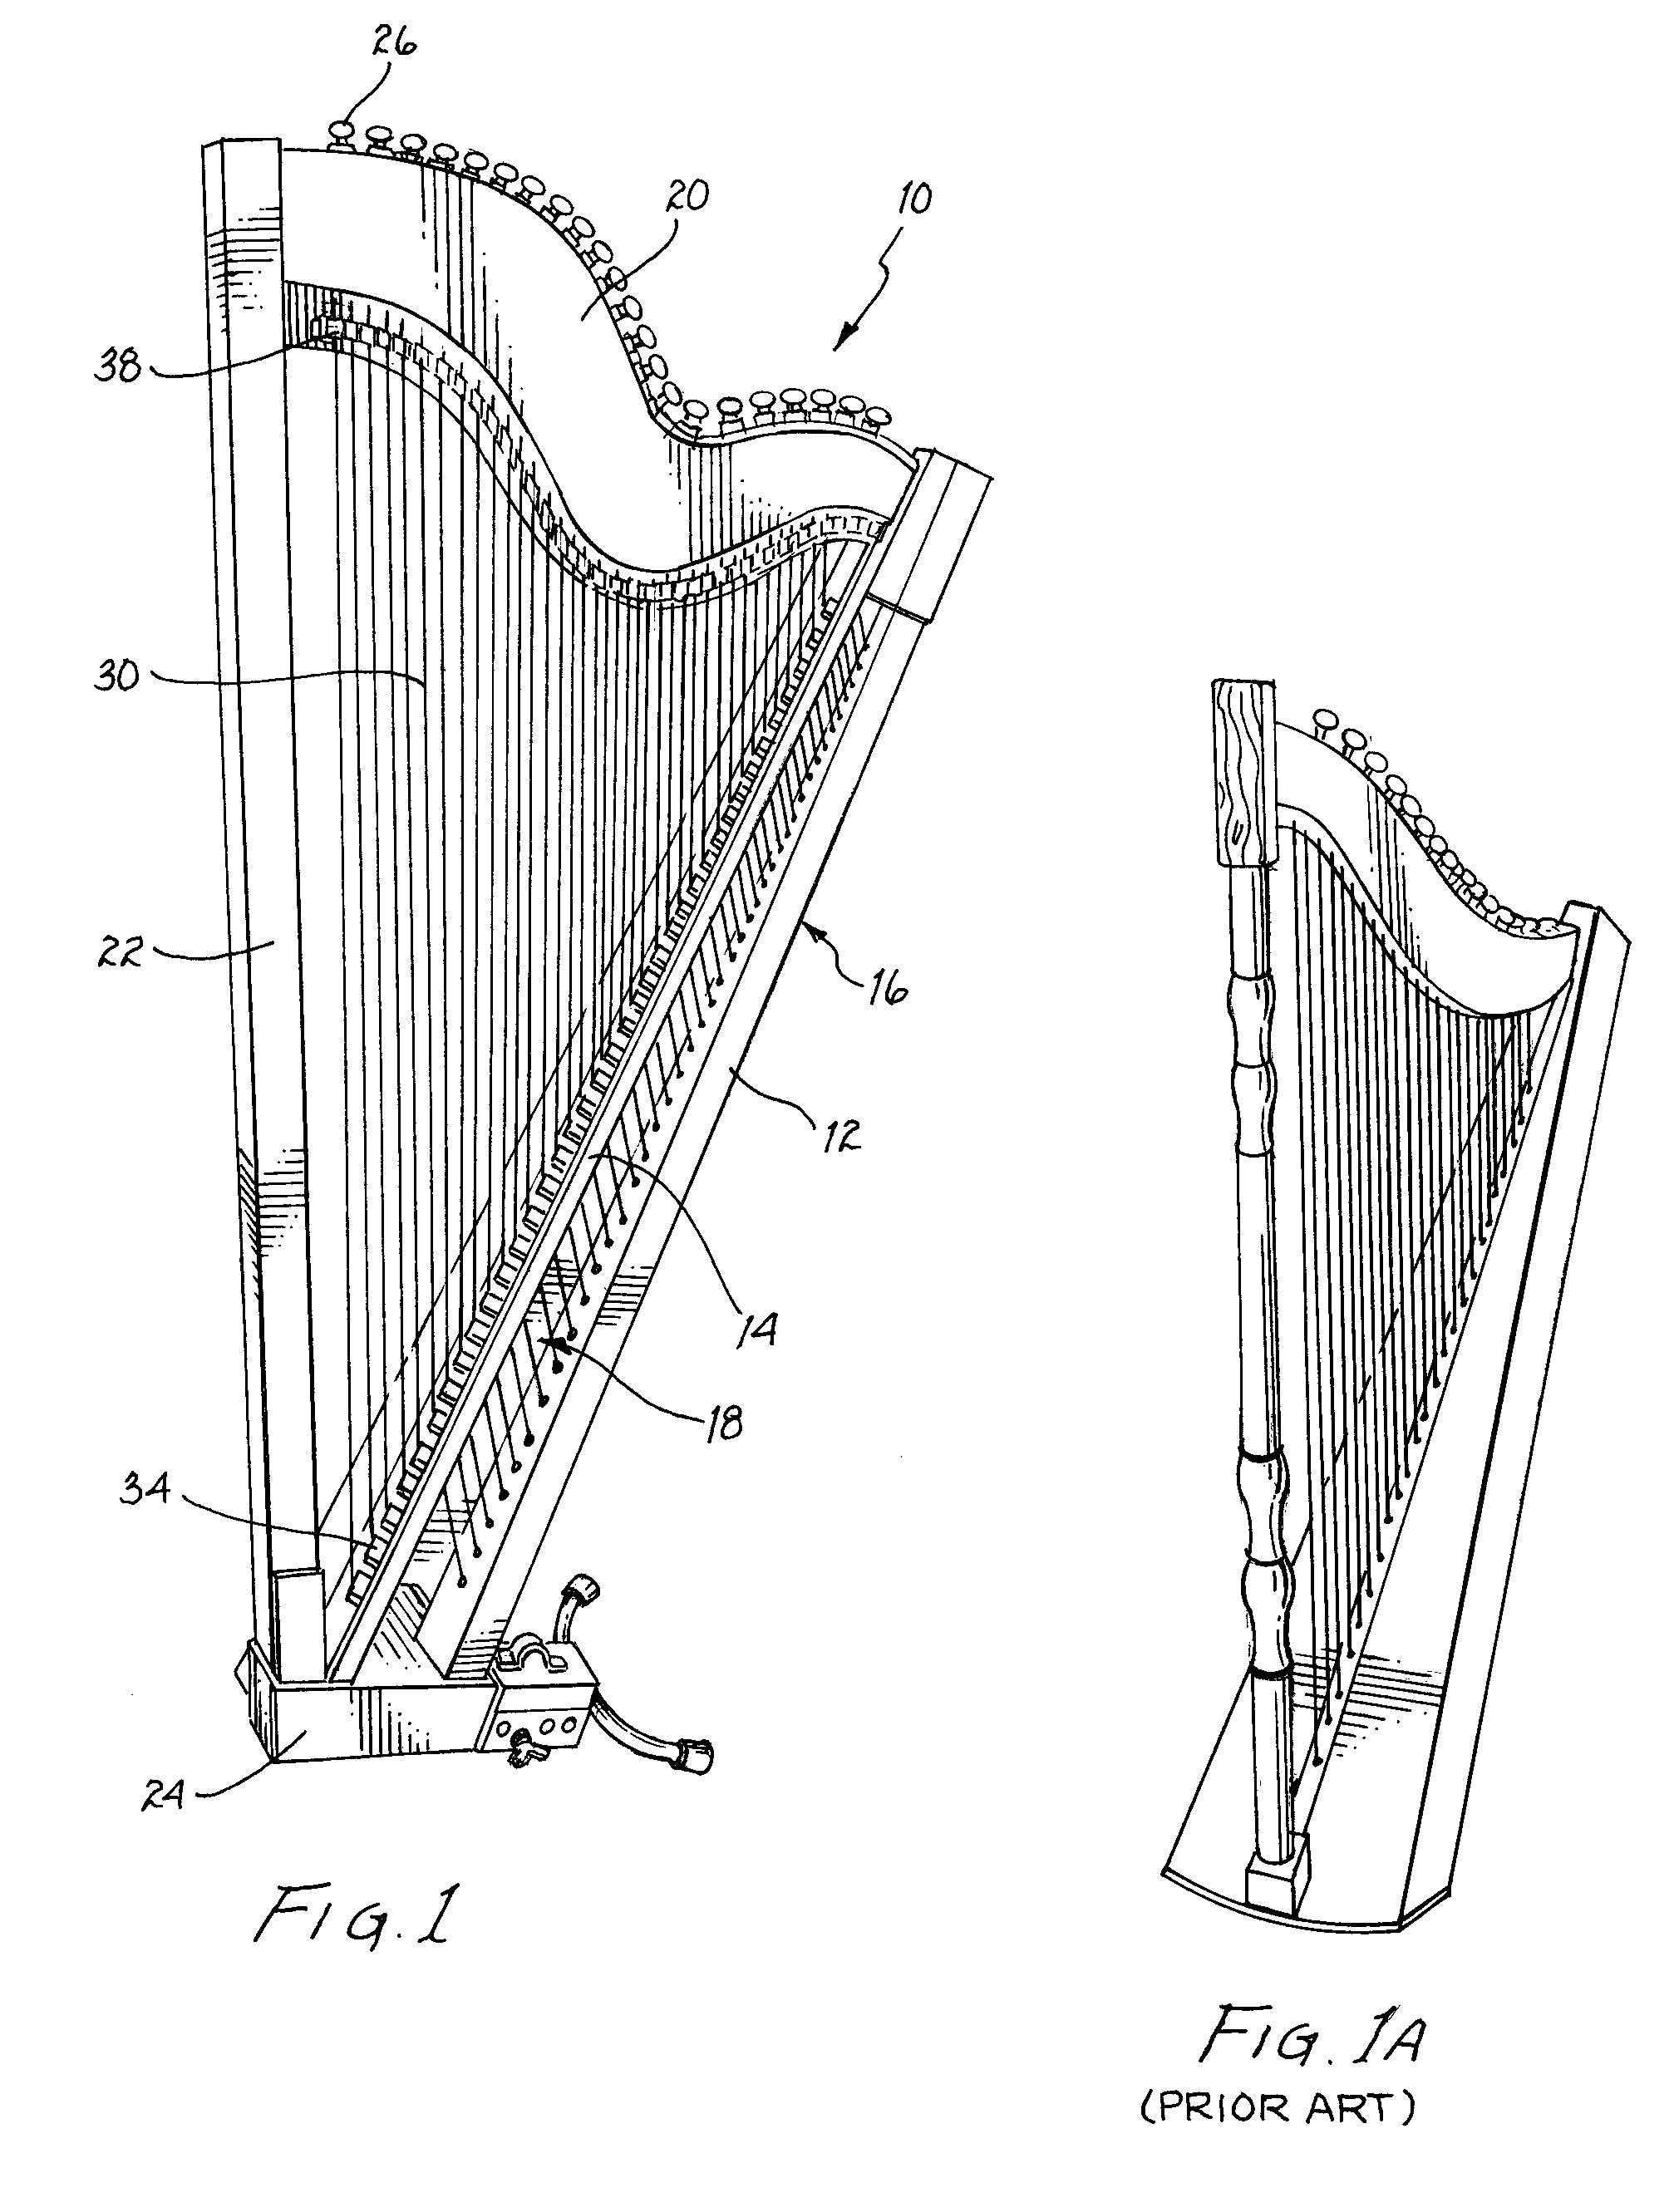 Harp with exposed soundboard and separate bridges and method of altering the pitch of the harp strings